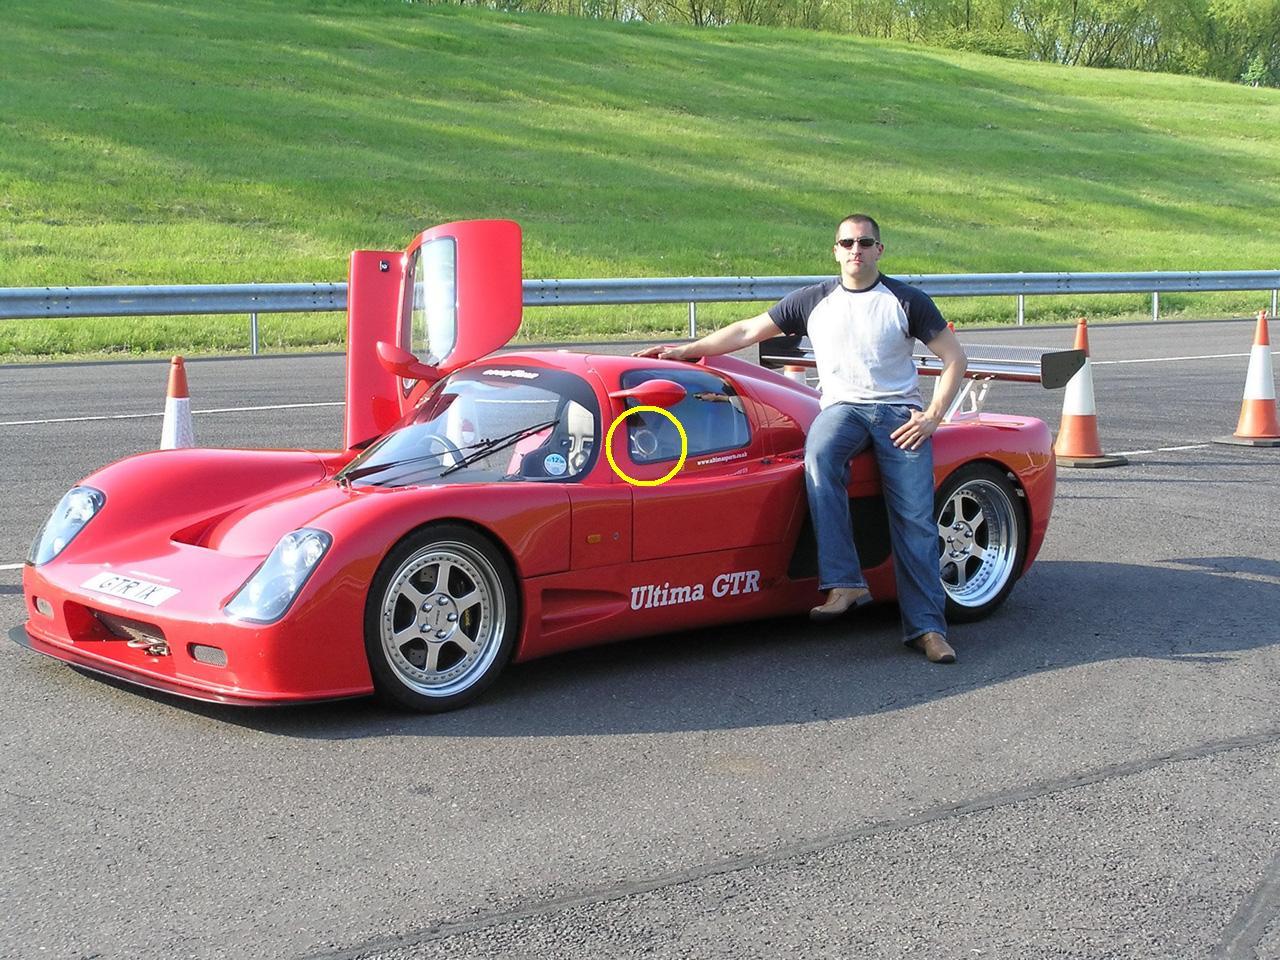 Ultima Gtr Backgrounds on Wallpapers Vista